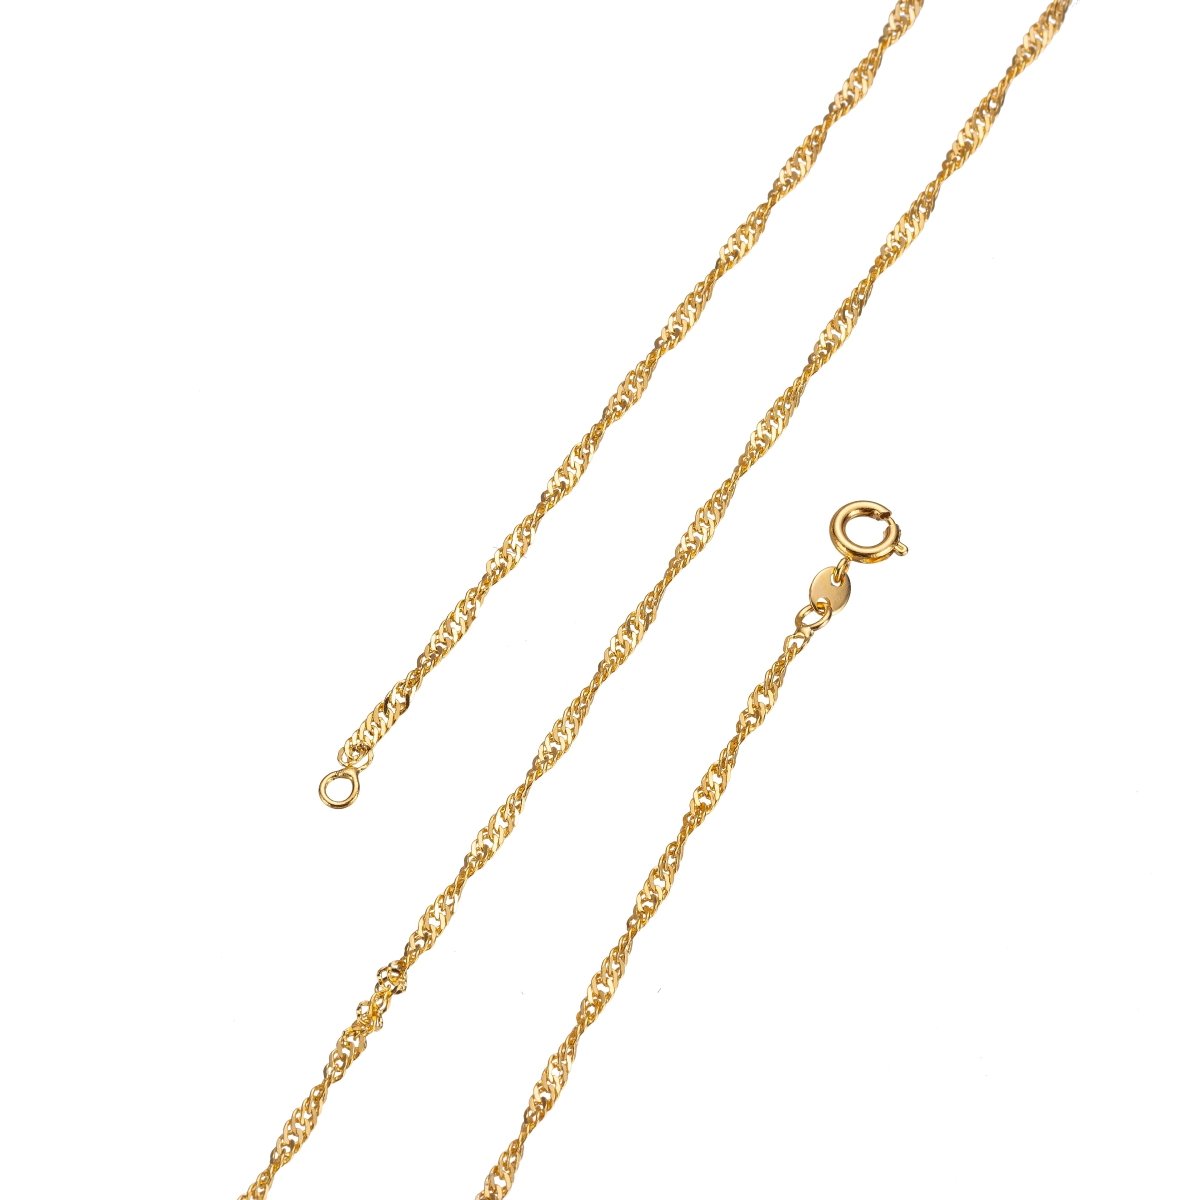 24K Gold Filled Necklace - Singapore Necklace - Dainty Gold Twist Link Chain Layering Necklace 2.2mm 23.5 inch ready to wear Spring Rings | CN-214 Clearance Pricing - DLUXCA